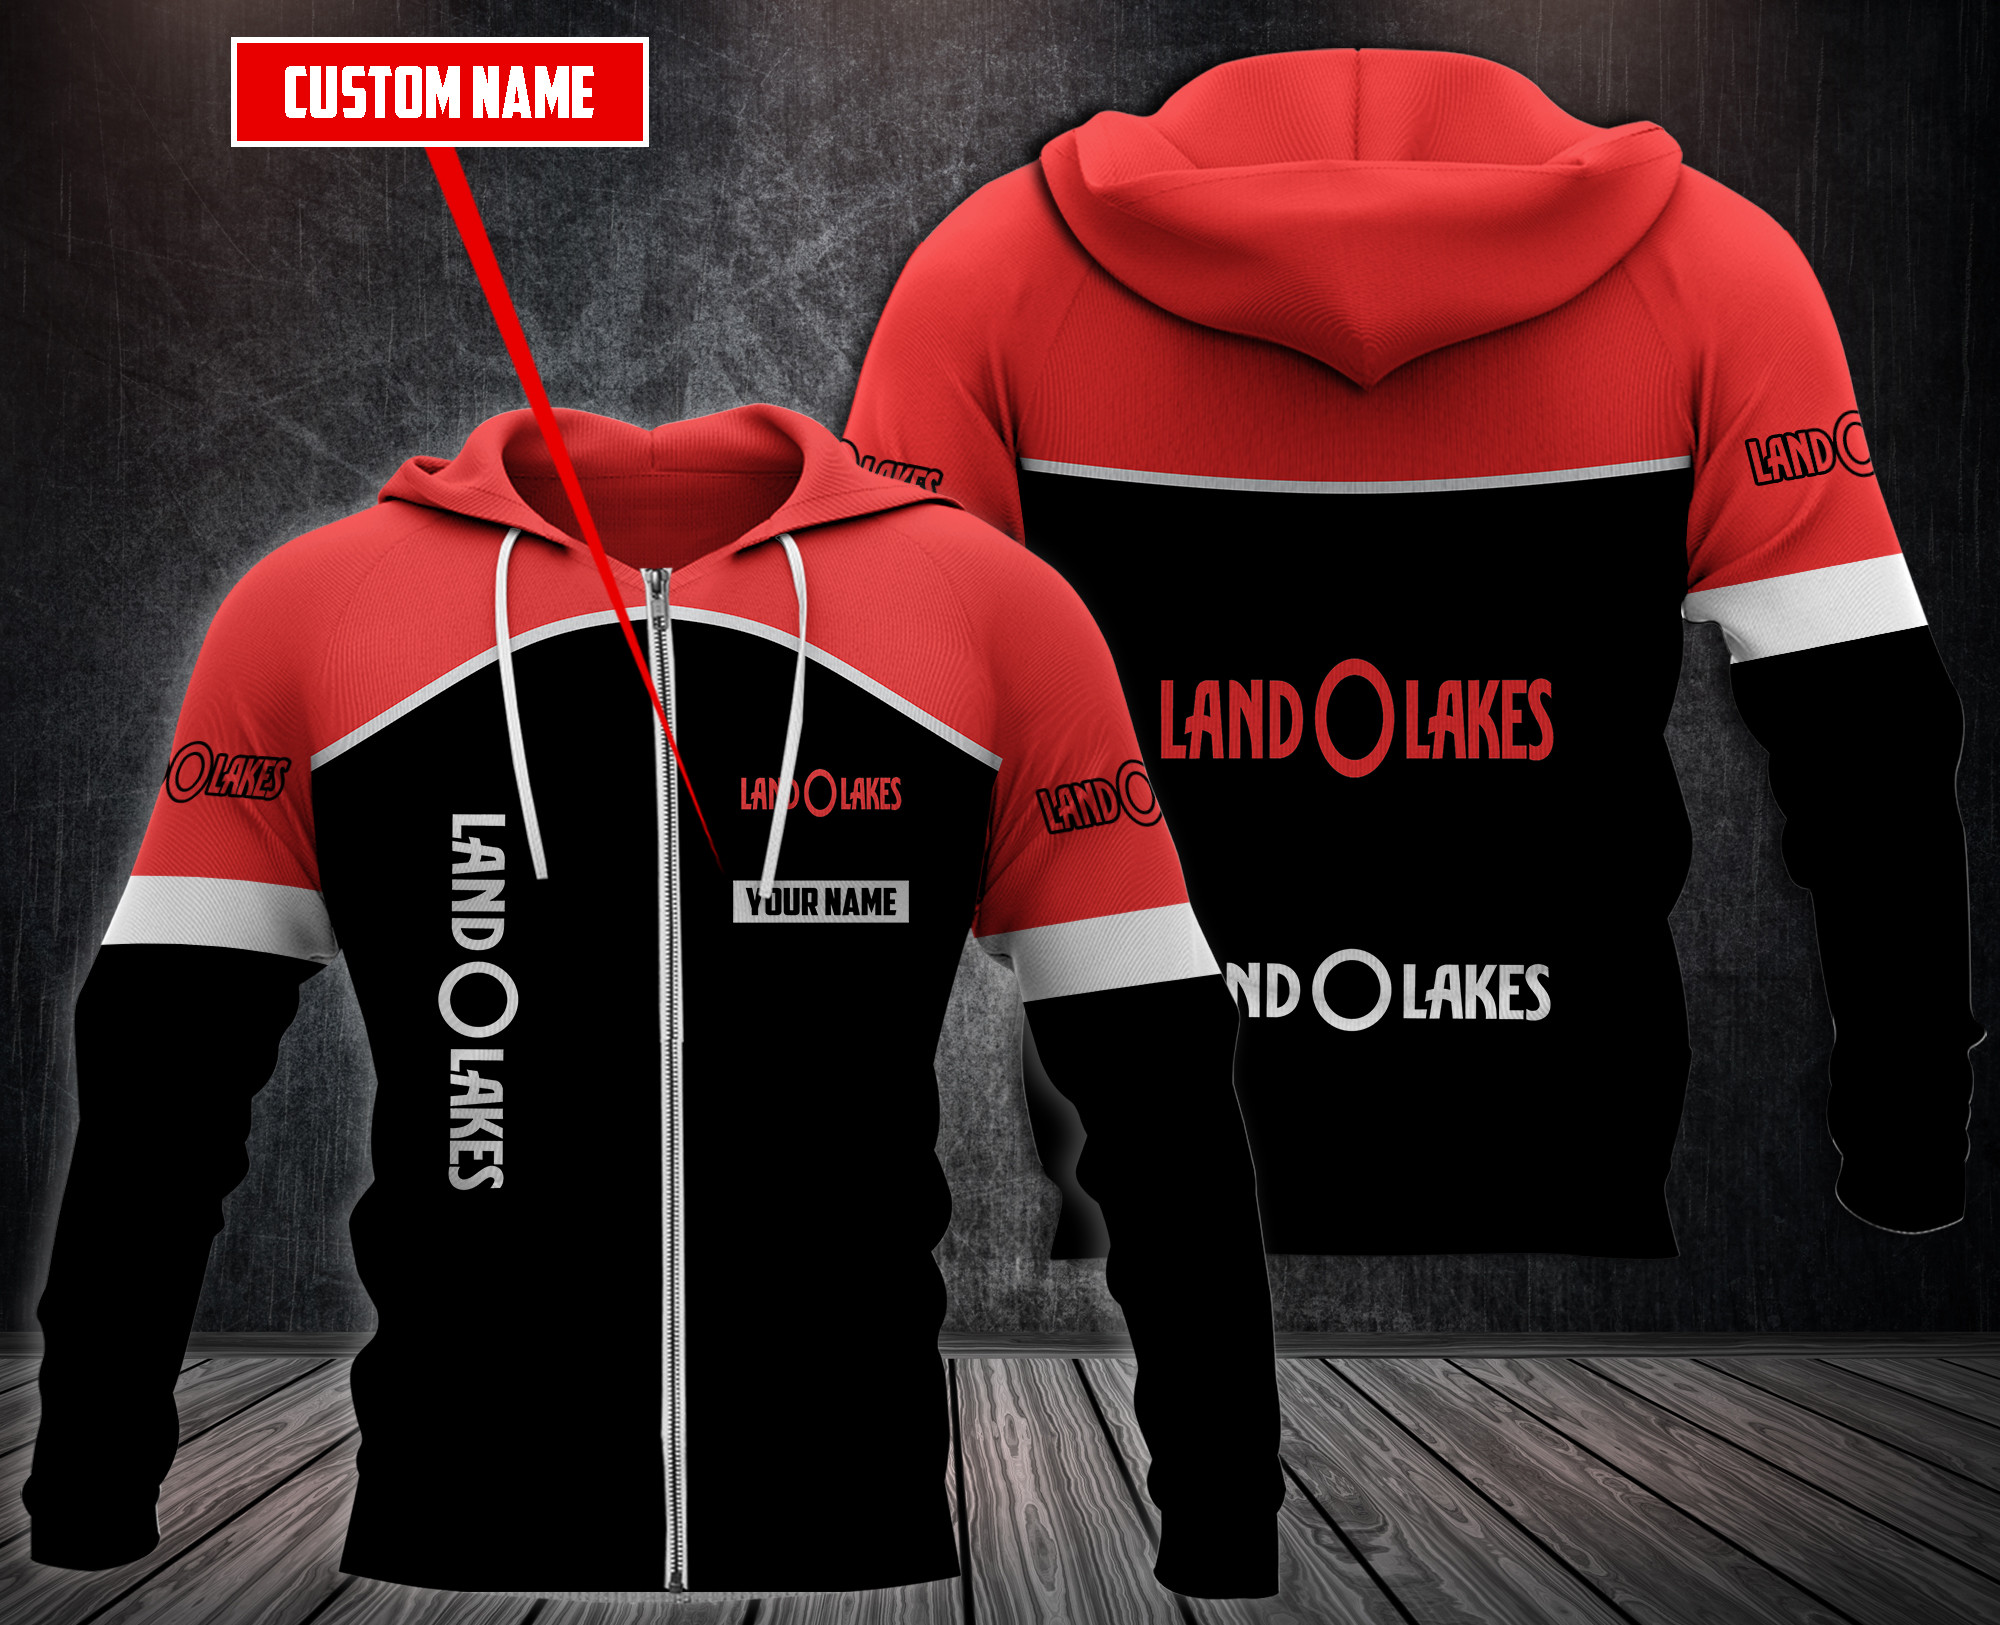 Choose the right hoodies for you on our boxboxshirt and ethershirt websites in 2022 90